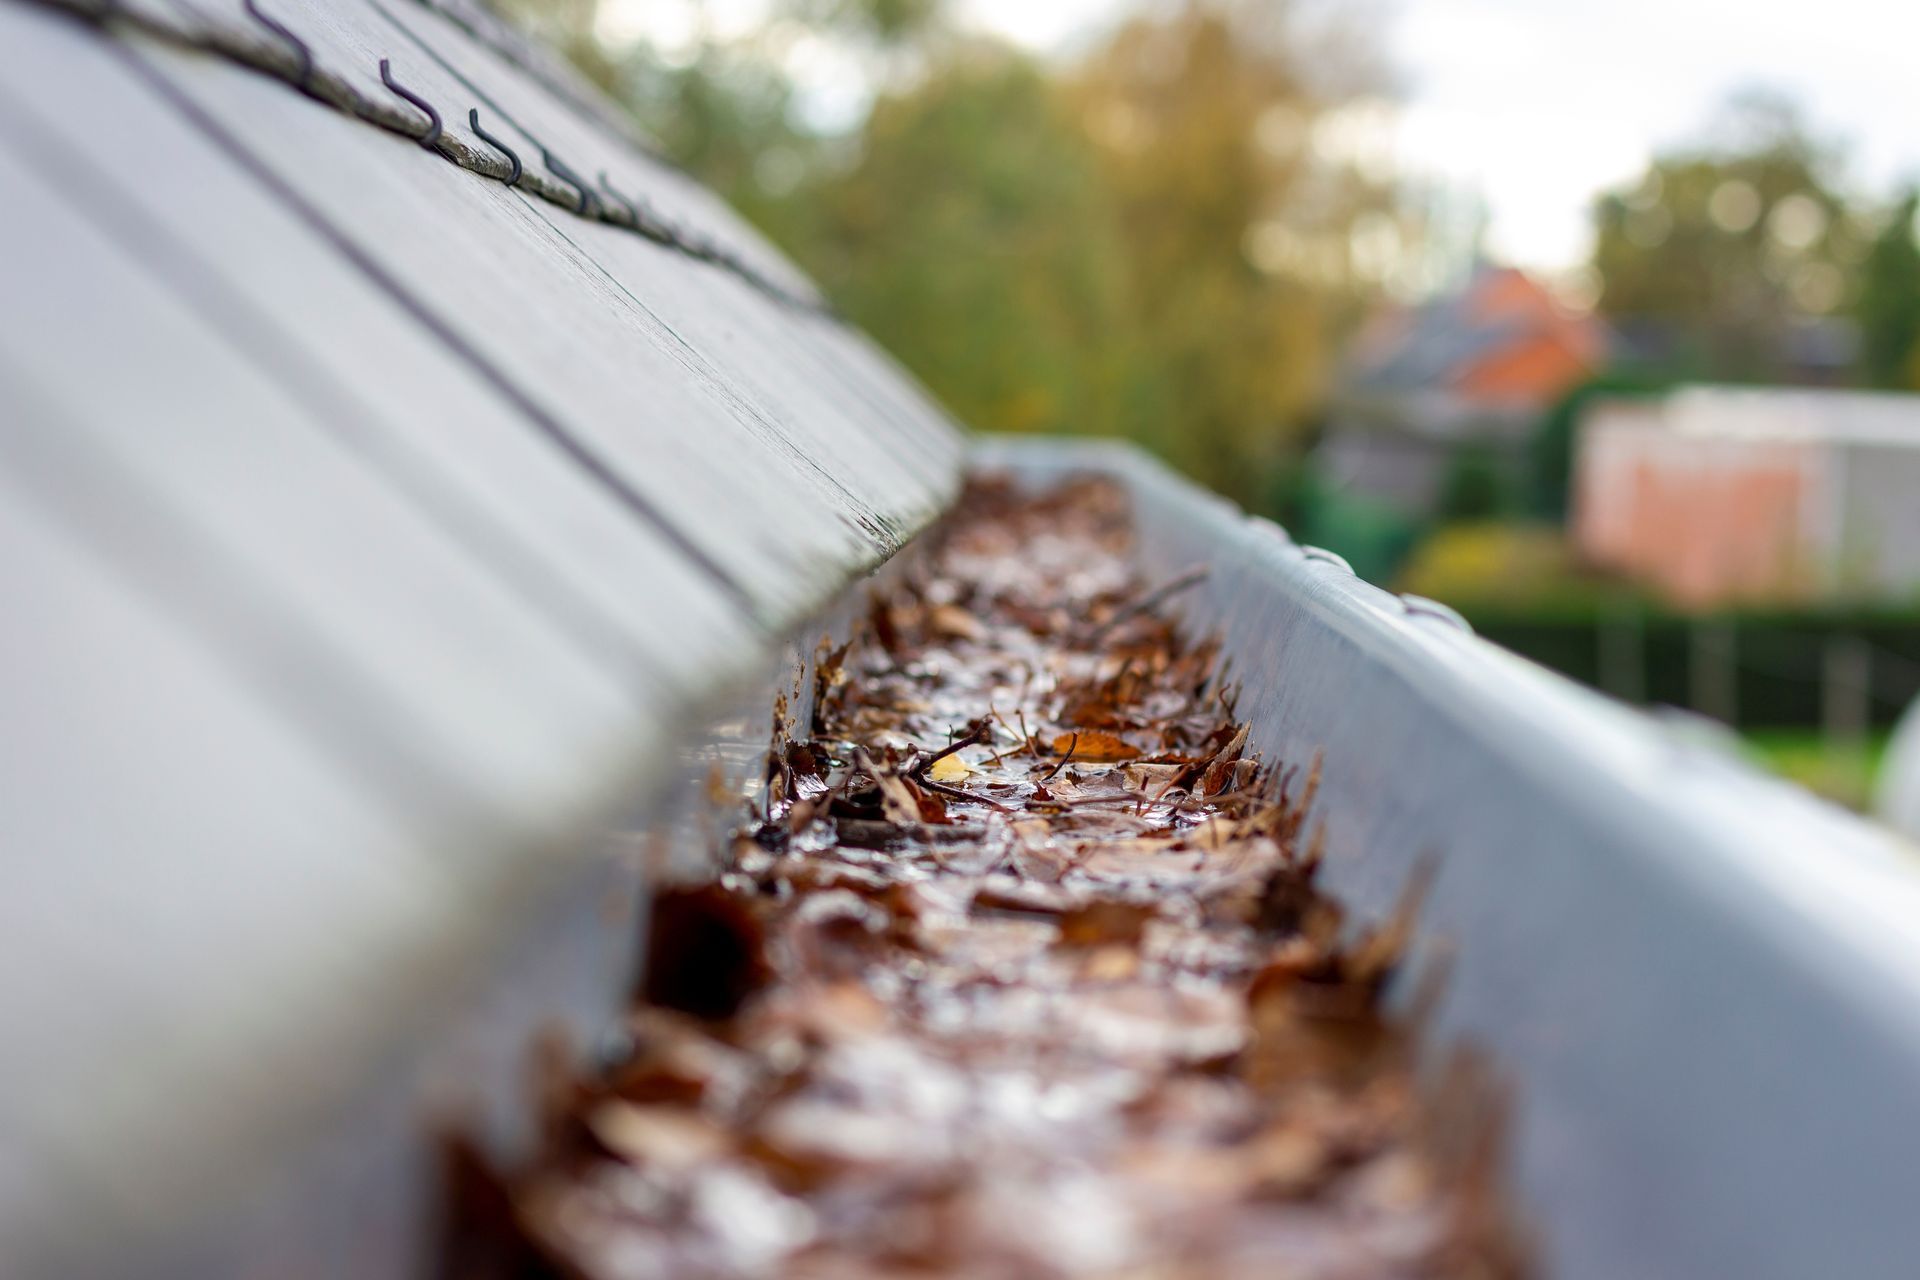 A close up of a gutter filled with leaves on a roof.